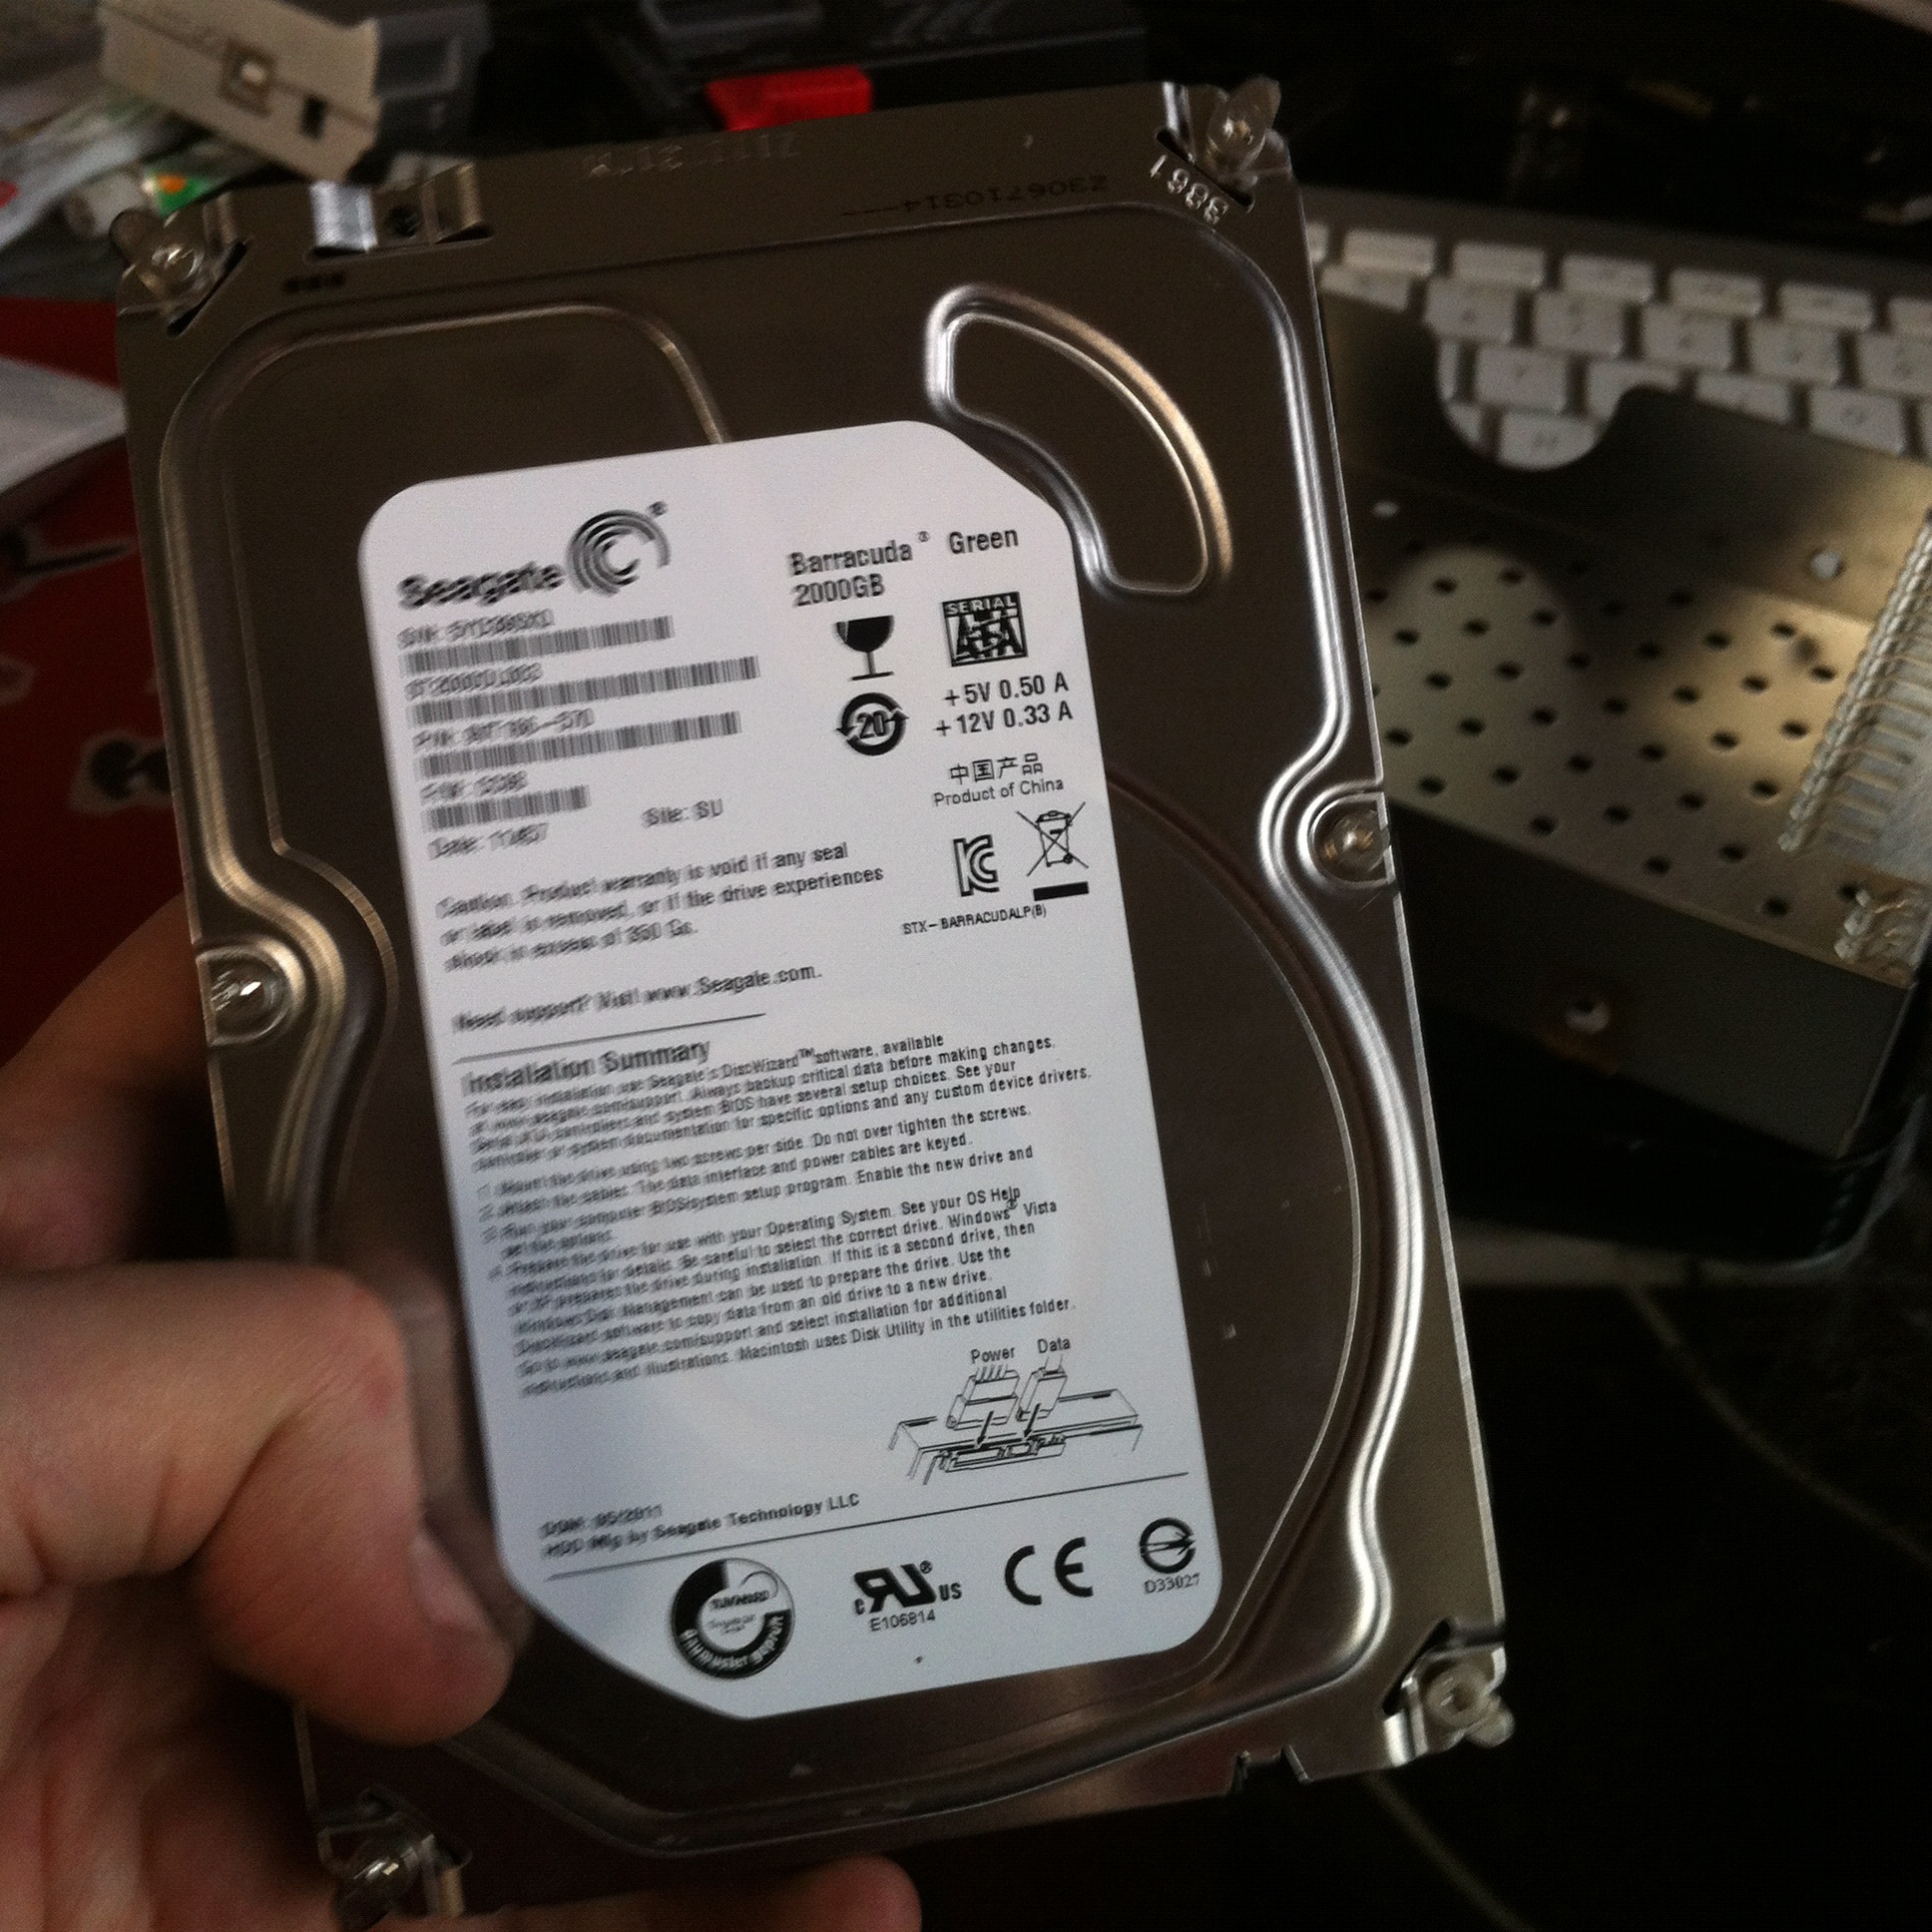 seagate how to transfer files to new computer